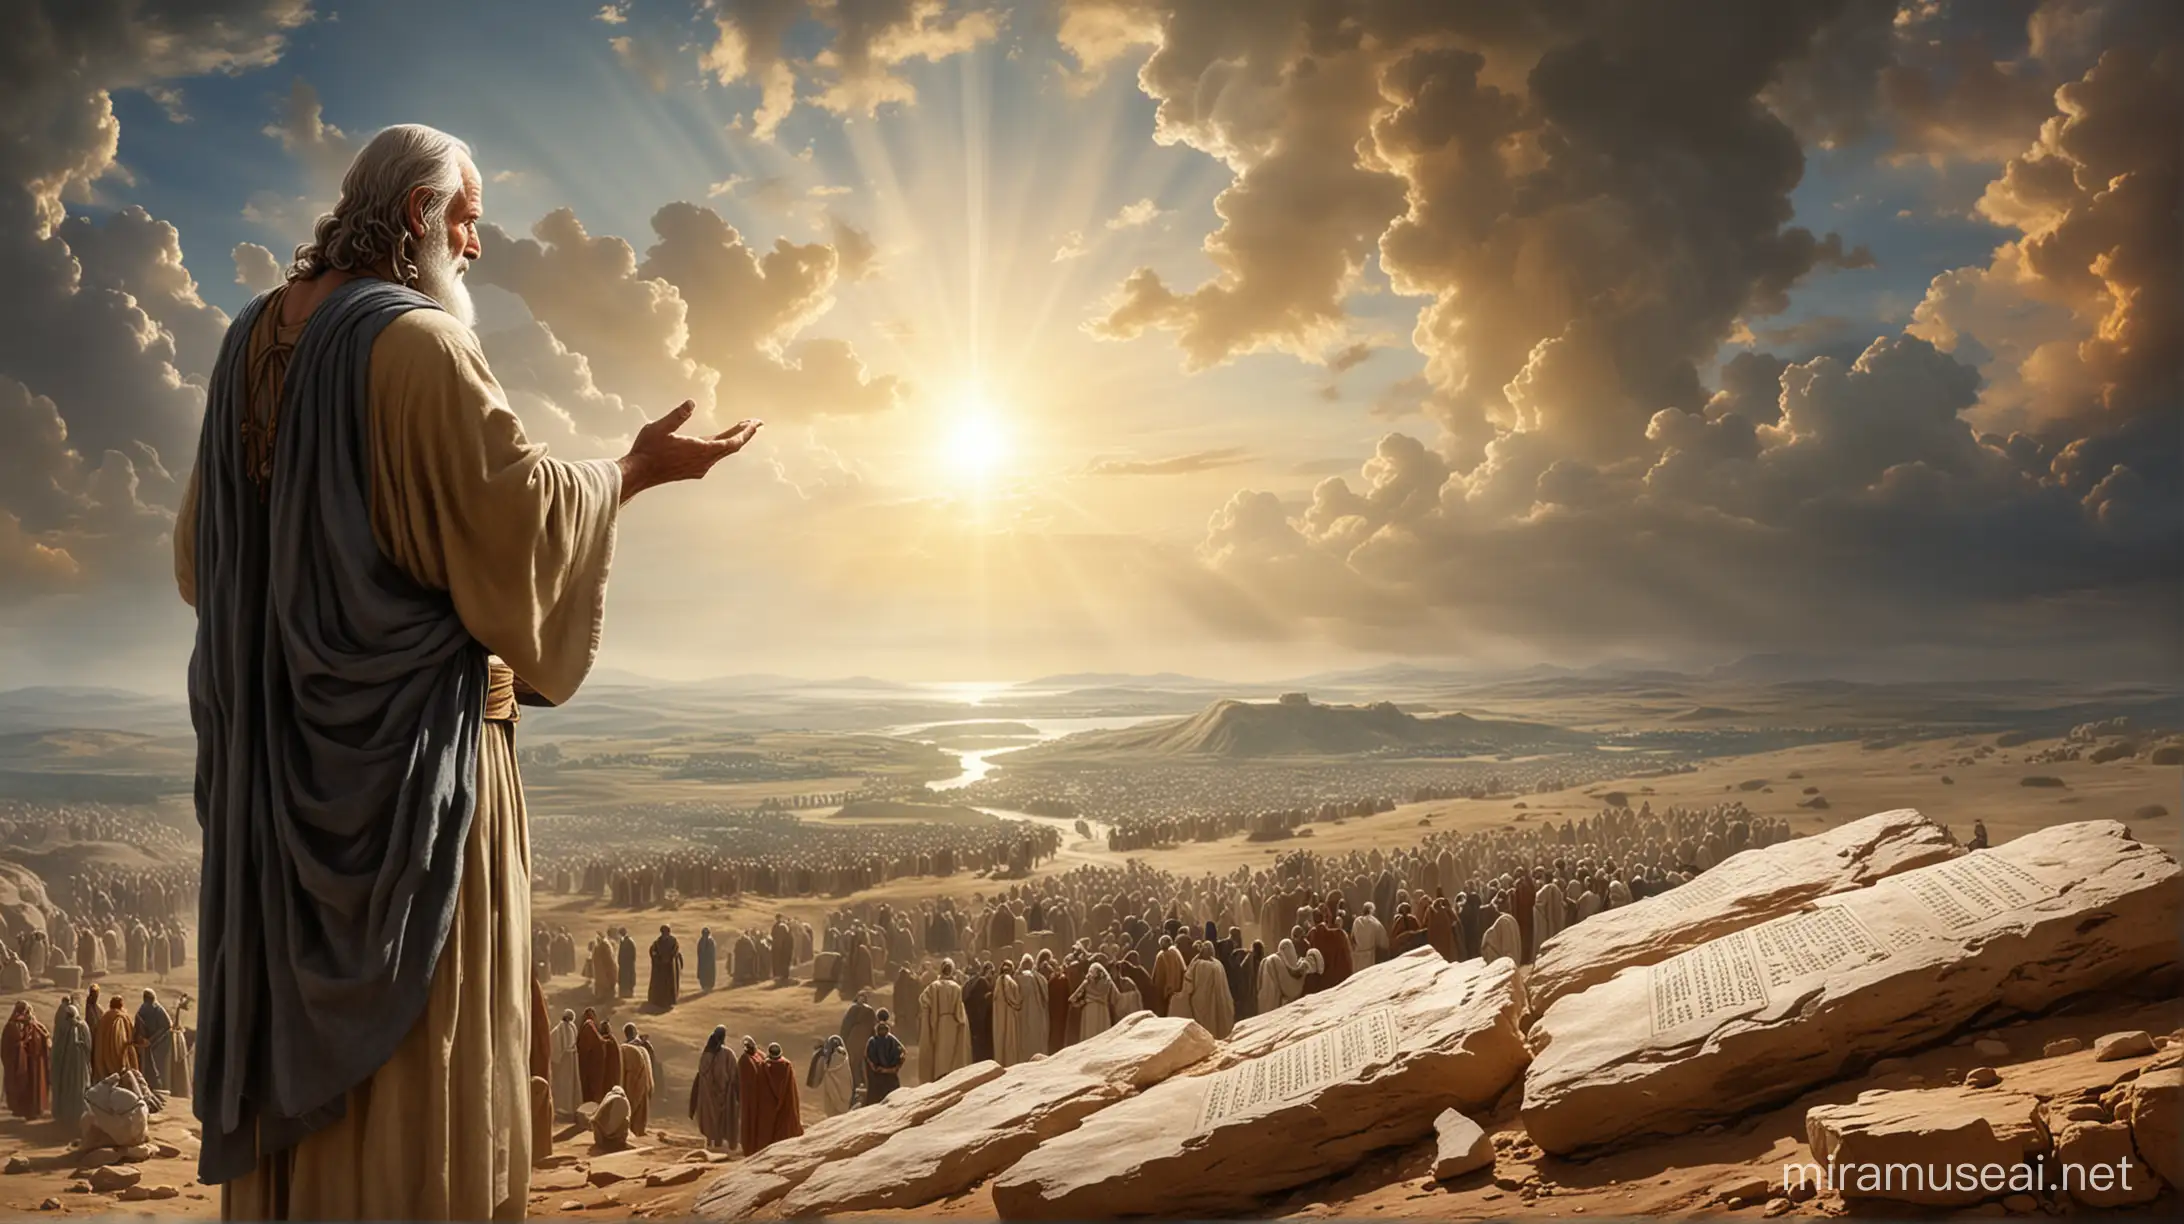 Moses Receives Two Stone Tablets from God on the Mount